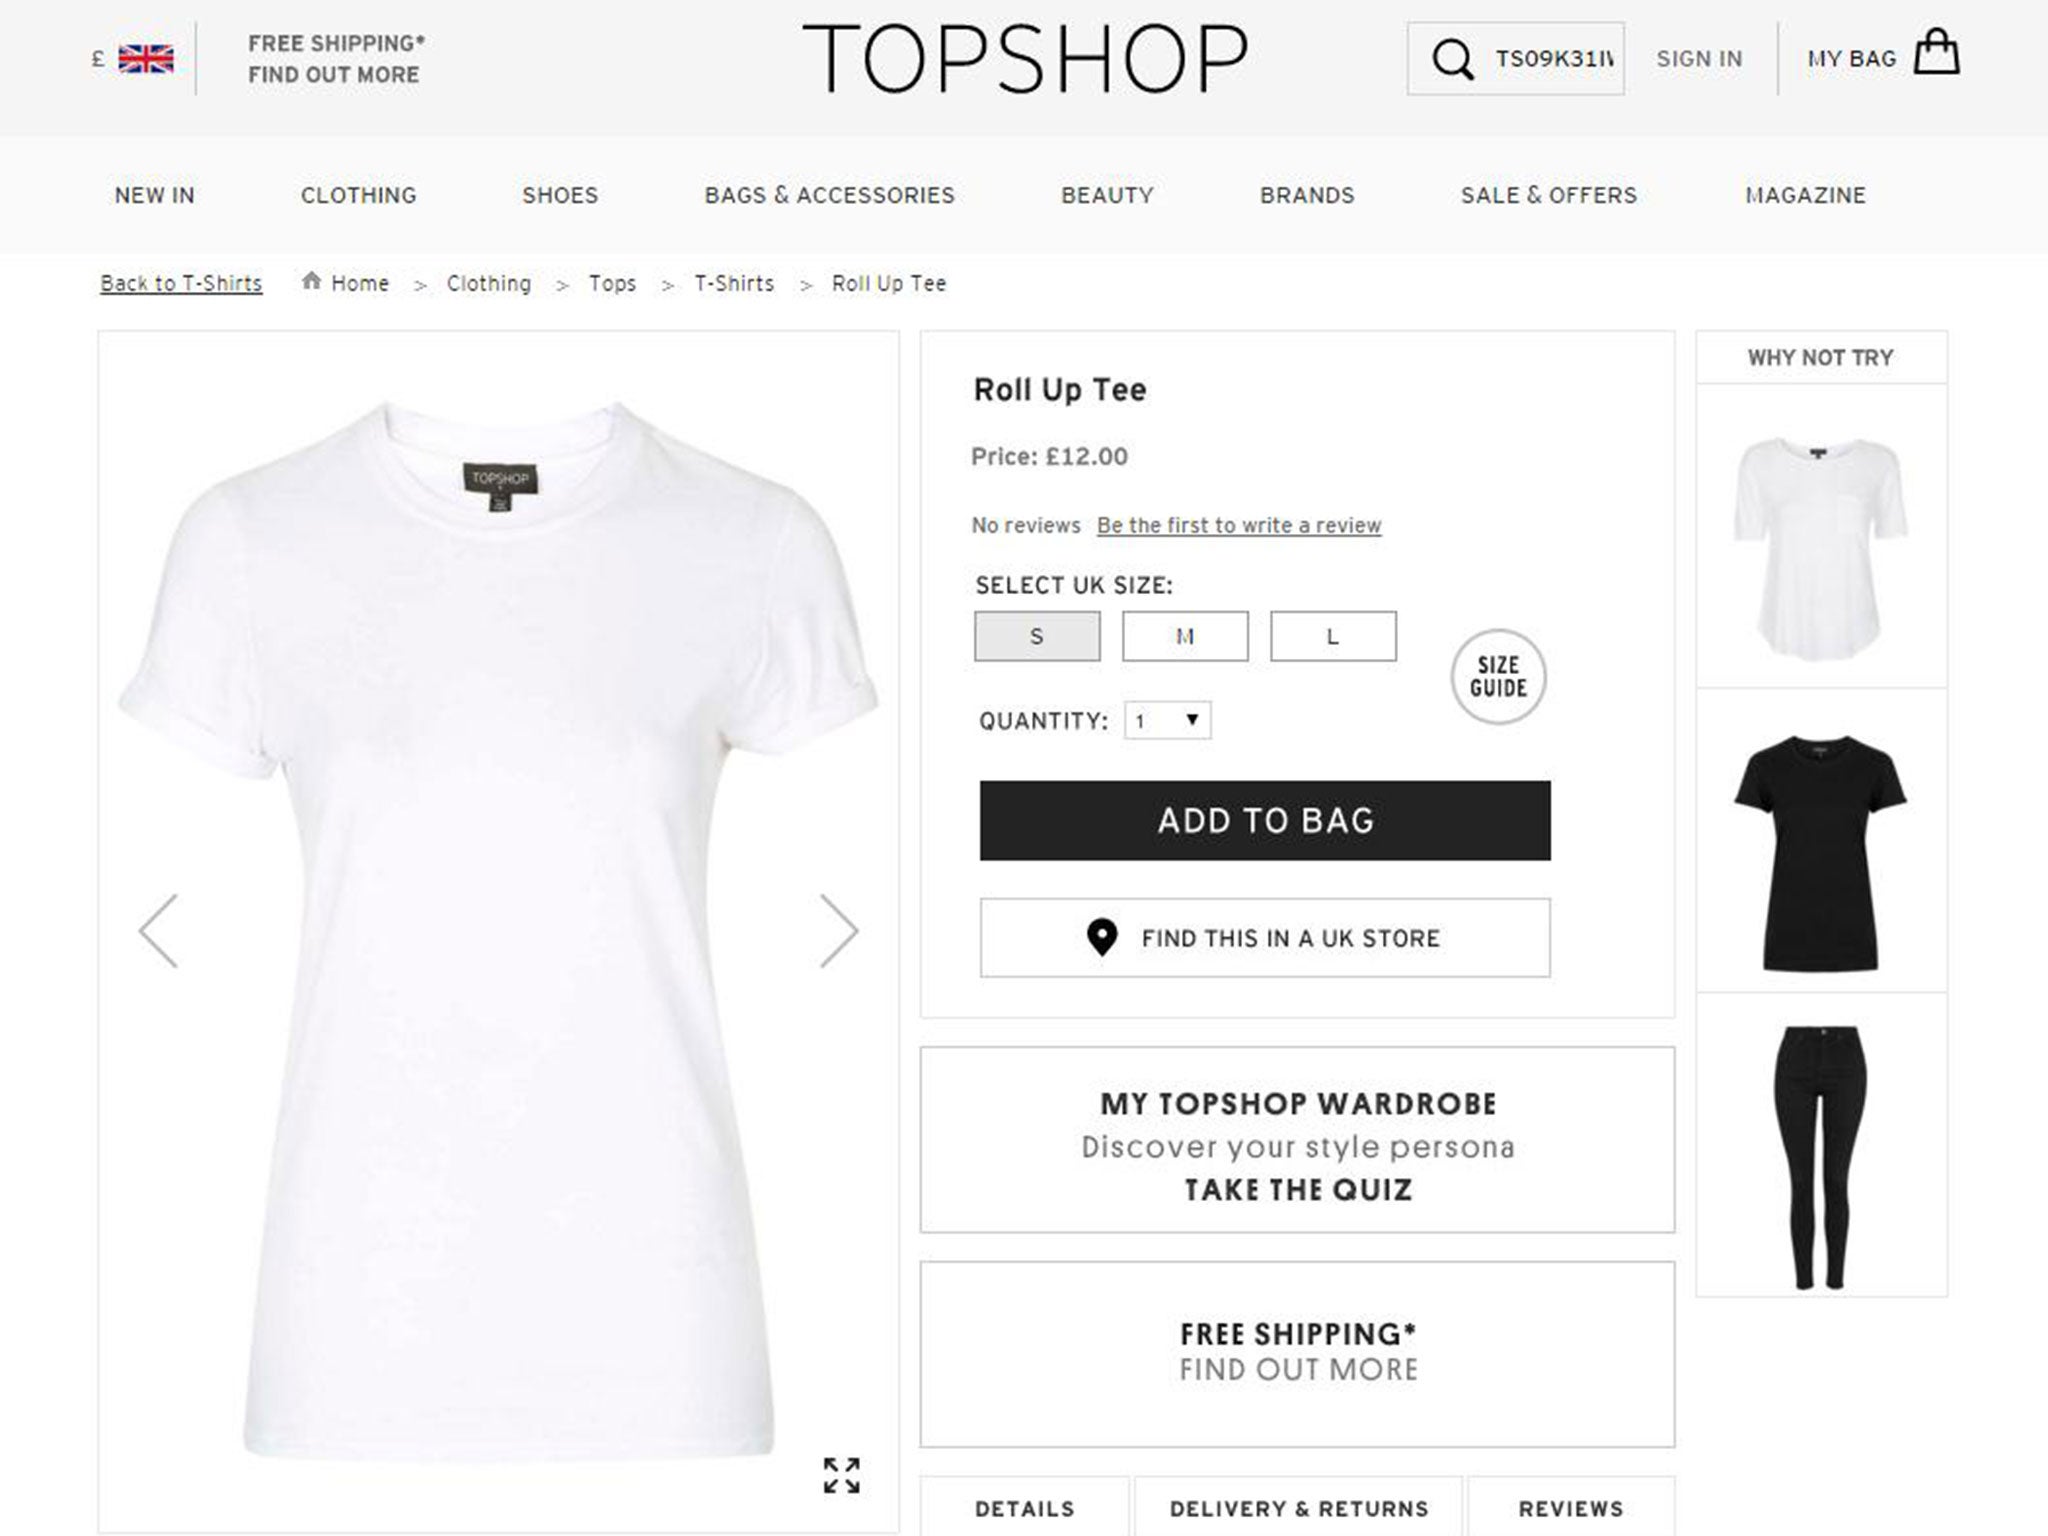 Clothing tended to be more expensive for women. A roughly equivalent T-shirt for men from Topman was £8.